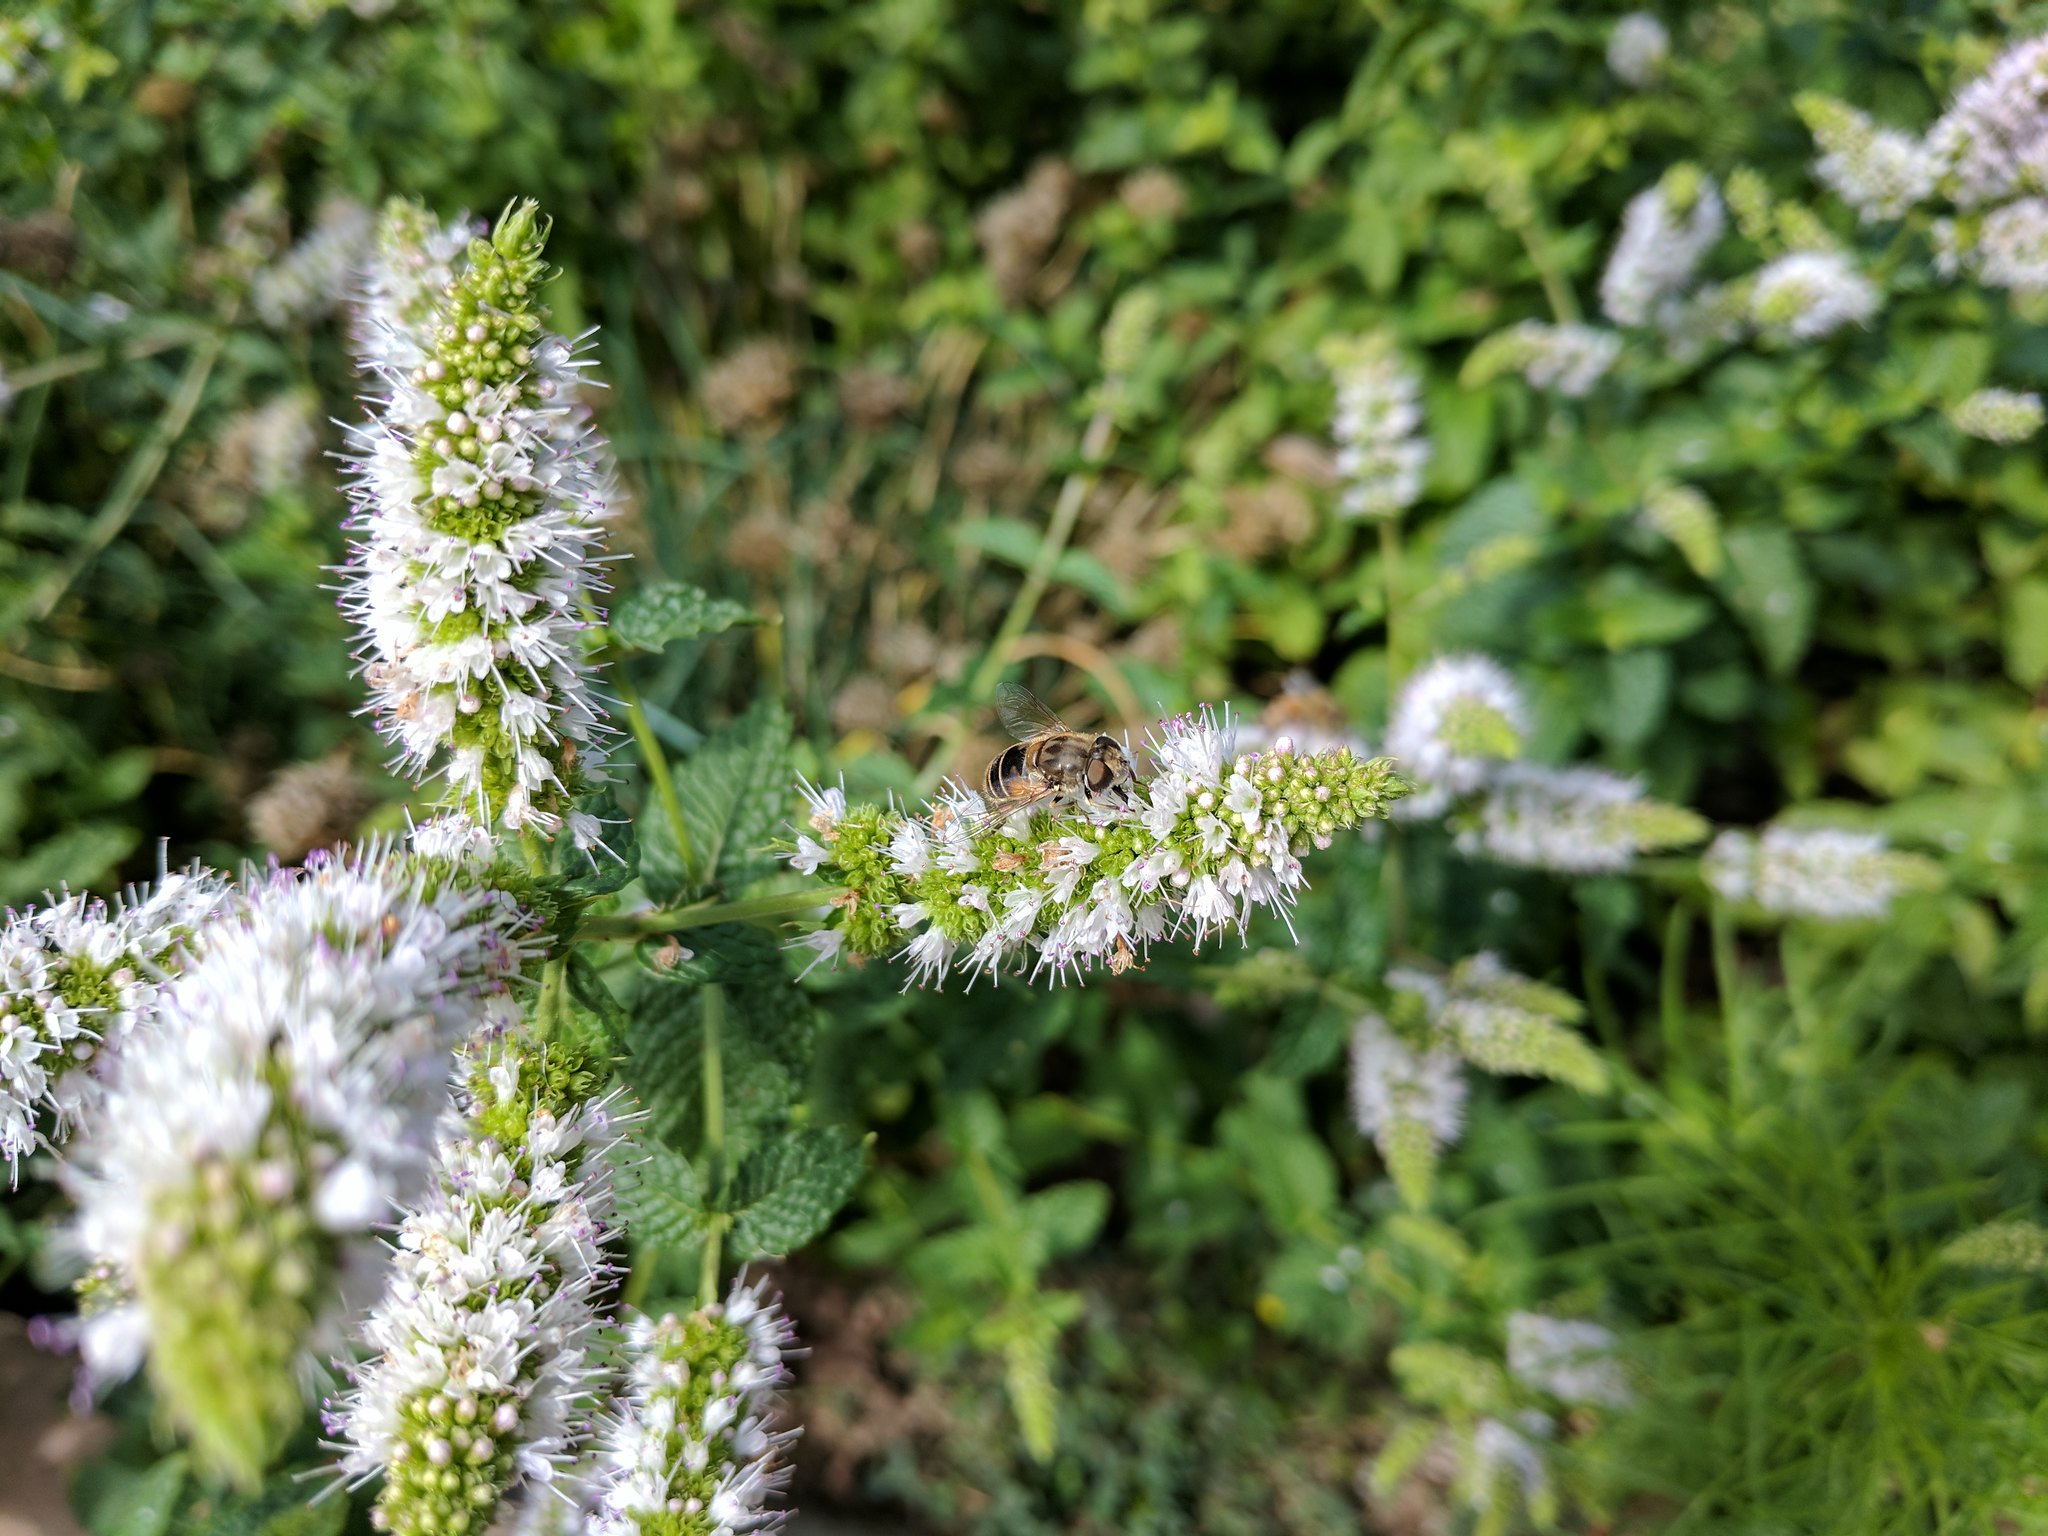 pollinating fly on spearmint